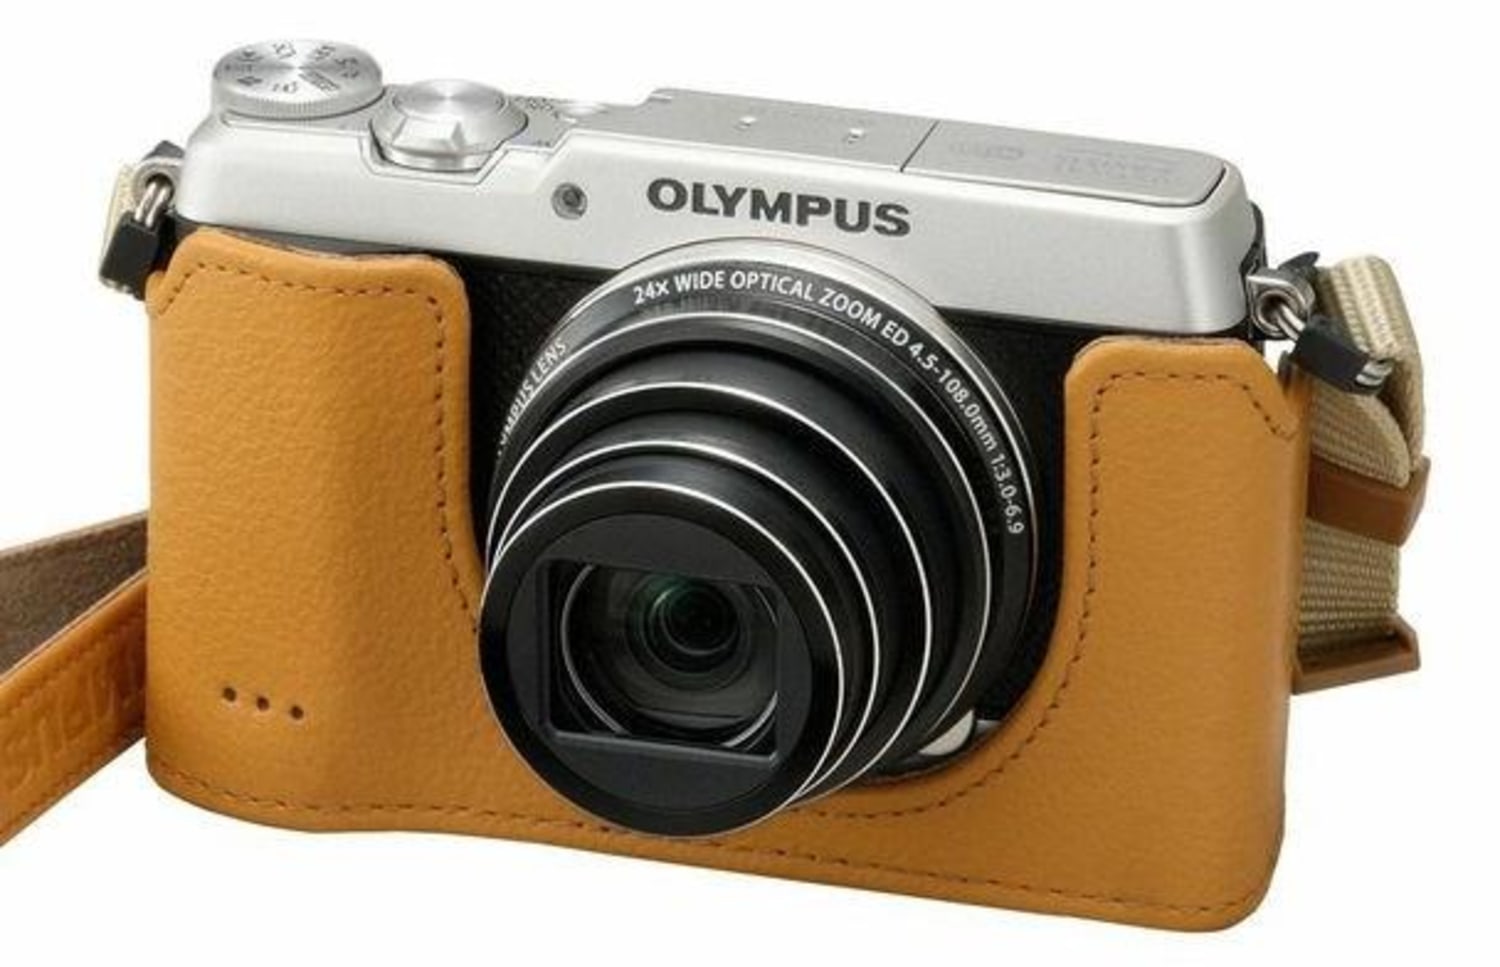 Olympus SH-2 Packs Zoom in a Tiny Body